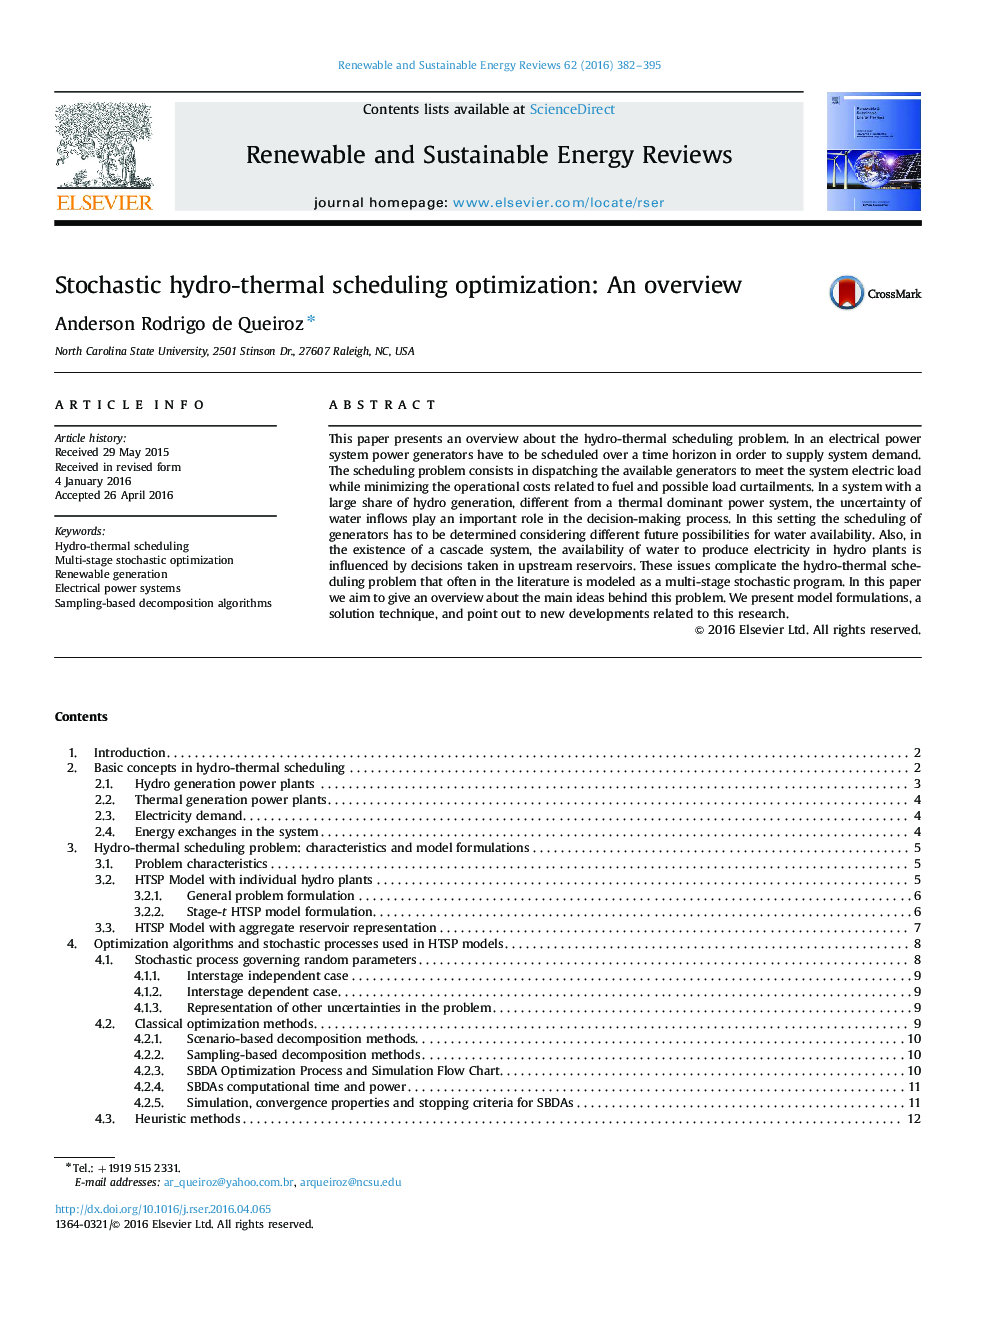 Stochastic hydro-thermal scheduling optimization: An overview